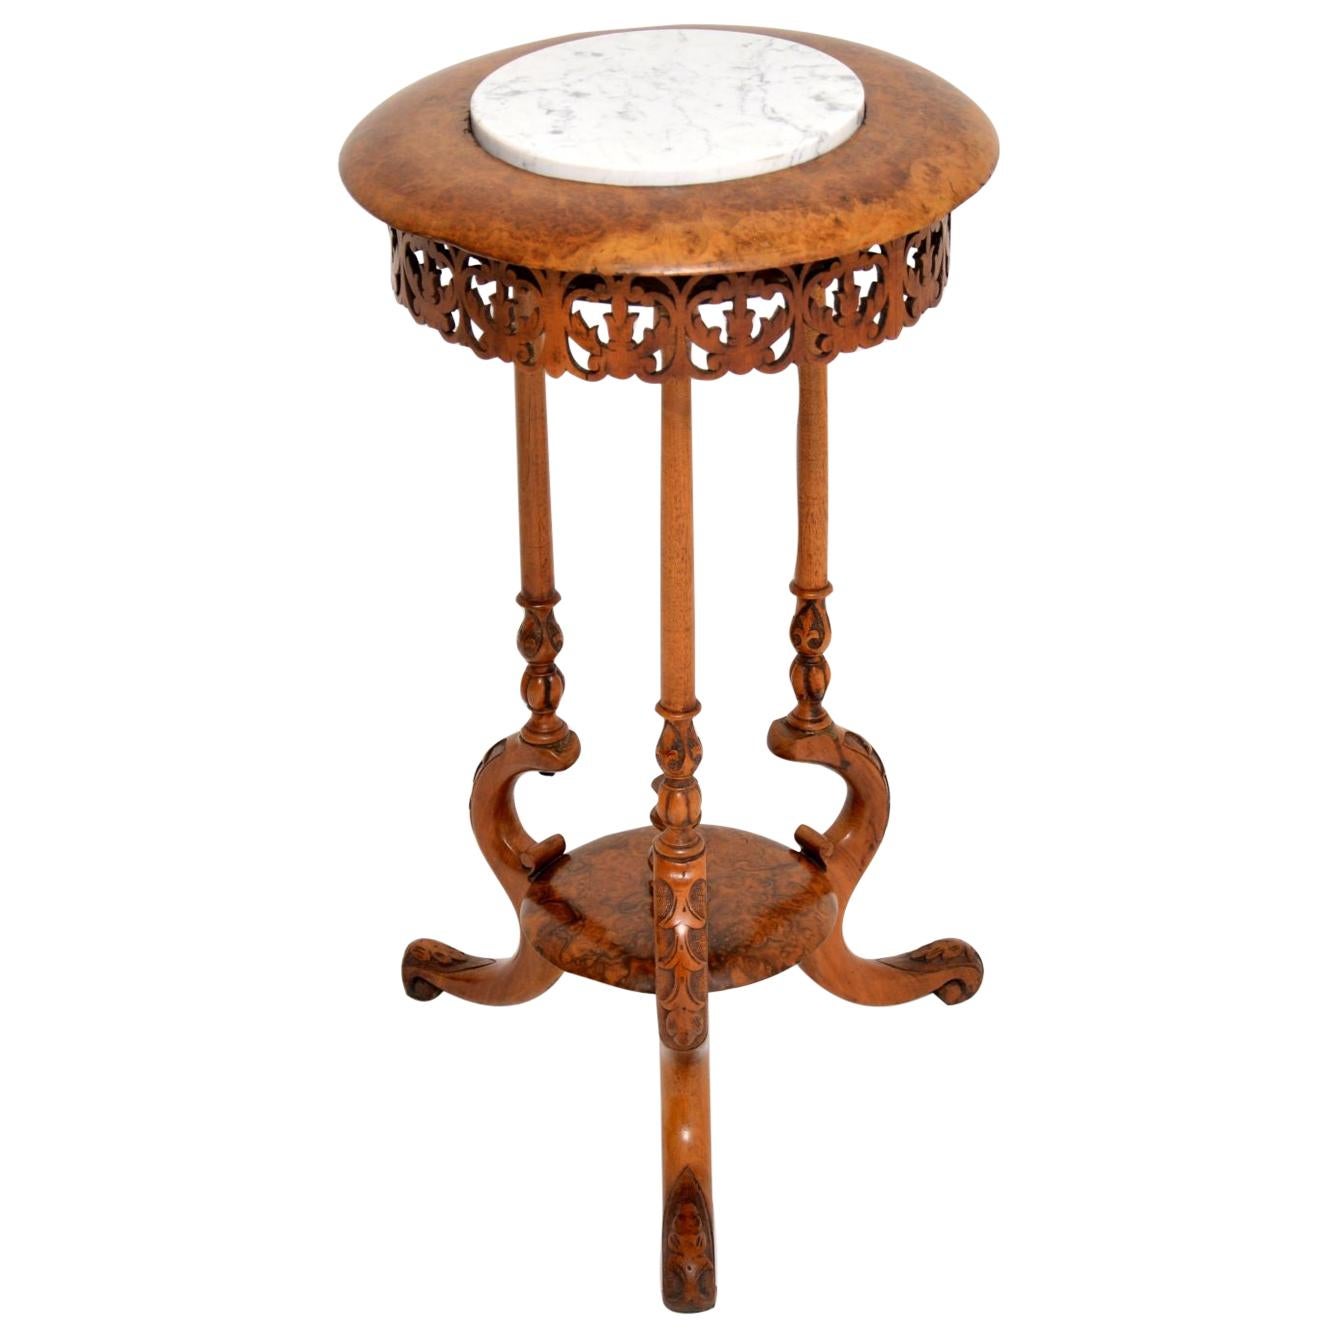 Very decorative antique Victorian walnut jardinière stand dating from circa 1860s period and in very good condition, with all the original pieces of wood intact.

It’s surprisingly stabile, given the design and general structure. The marble top